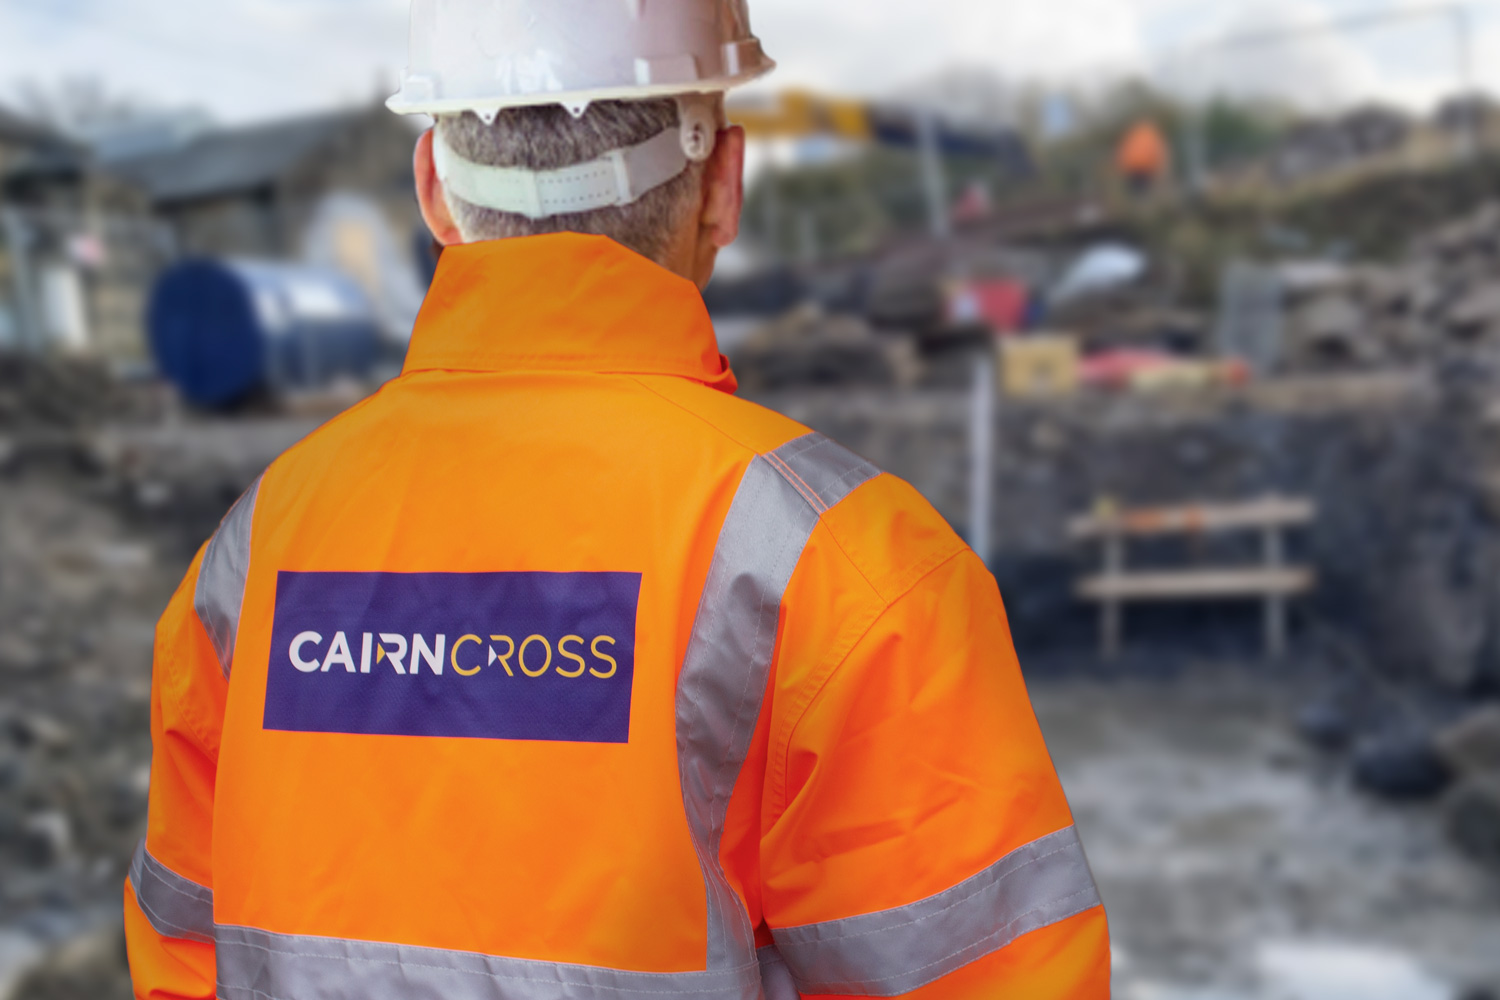 CAIRN CROSS UNVEIL NEW IDENTITY TO 'SHAPE FUTURE INFRASTRUCTURE'